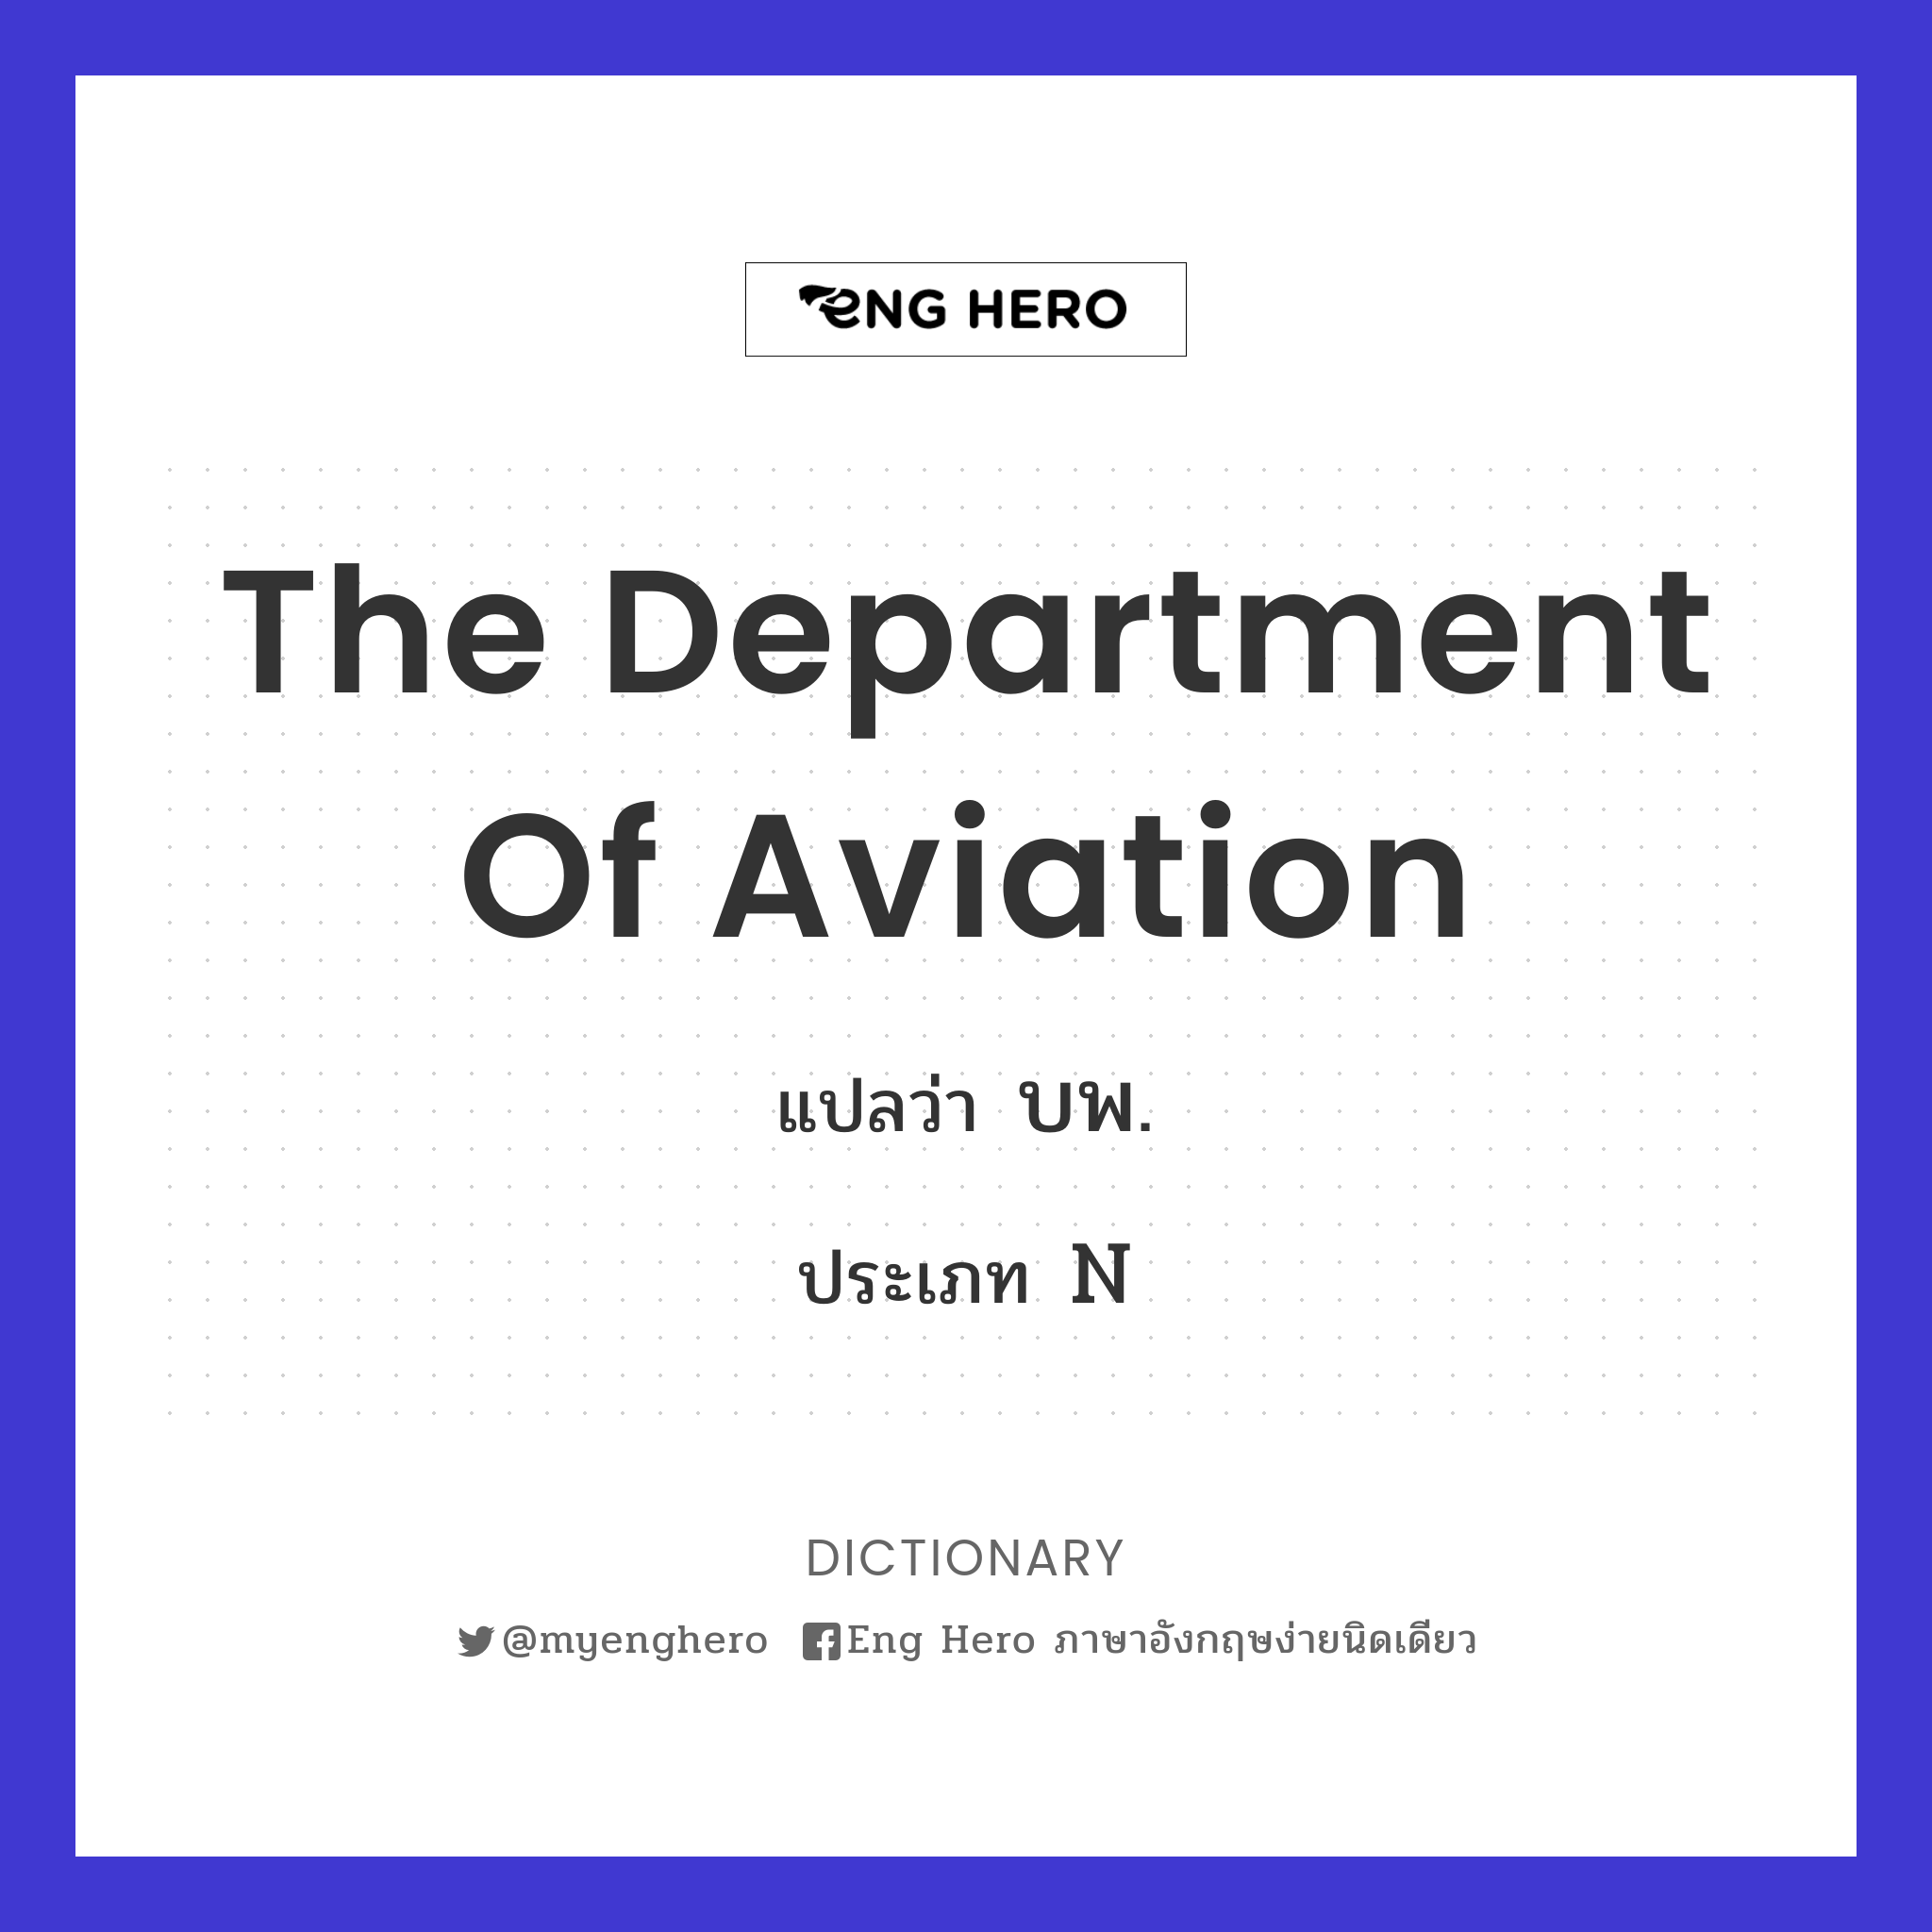 The Department of Aviation